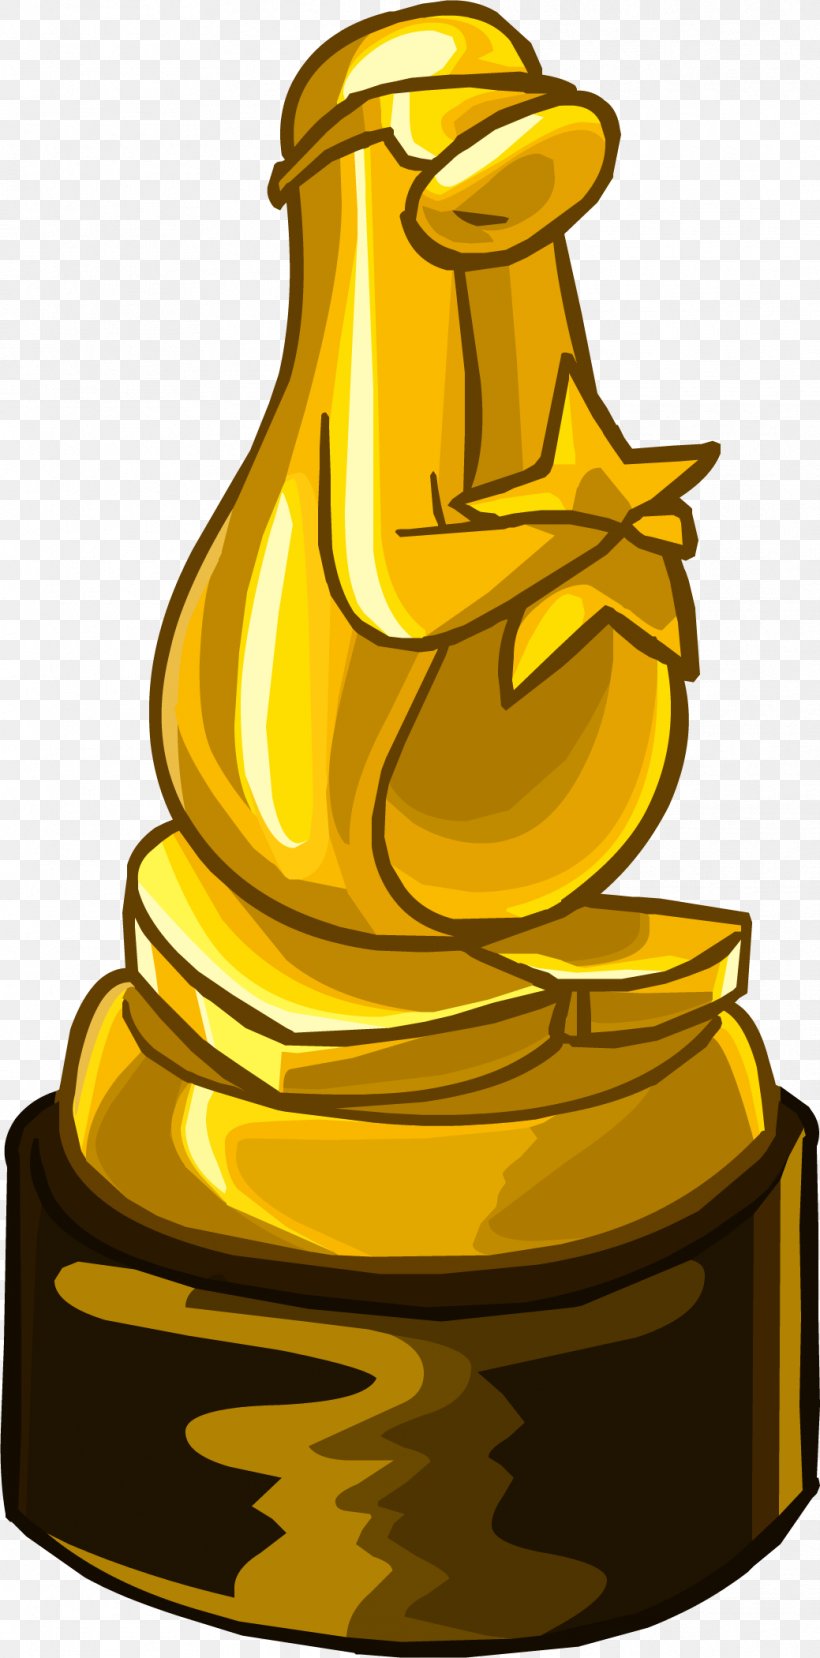 Club Penguin Silver Award Gold Award, PNG, 1039x2101px, Club Penguin, Award, Blog Award, Club Penguin Island, Excellence Download Free